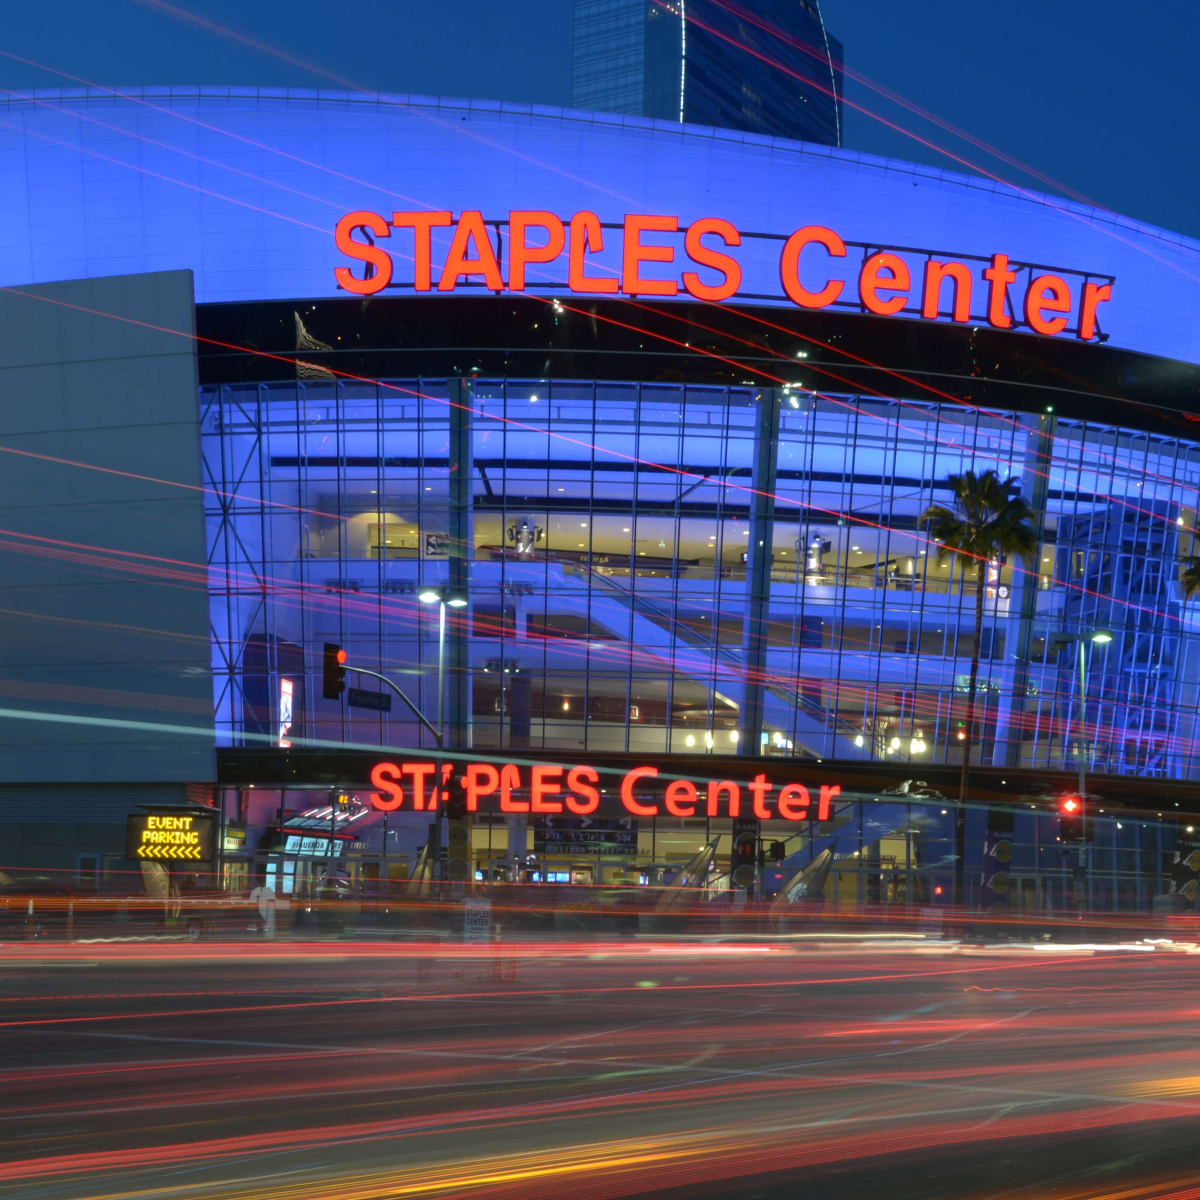 Lakers: Say Goodbye To Staples Center - All Lakers